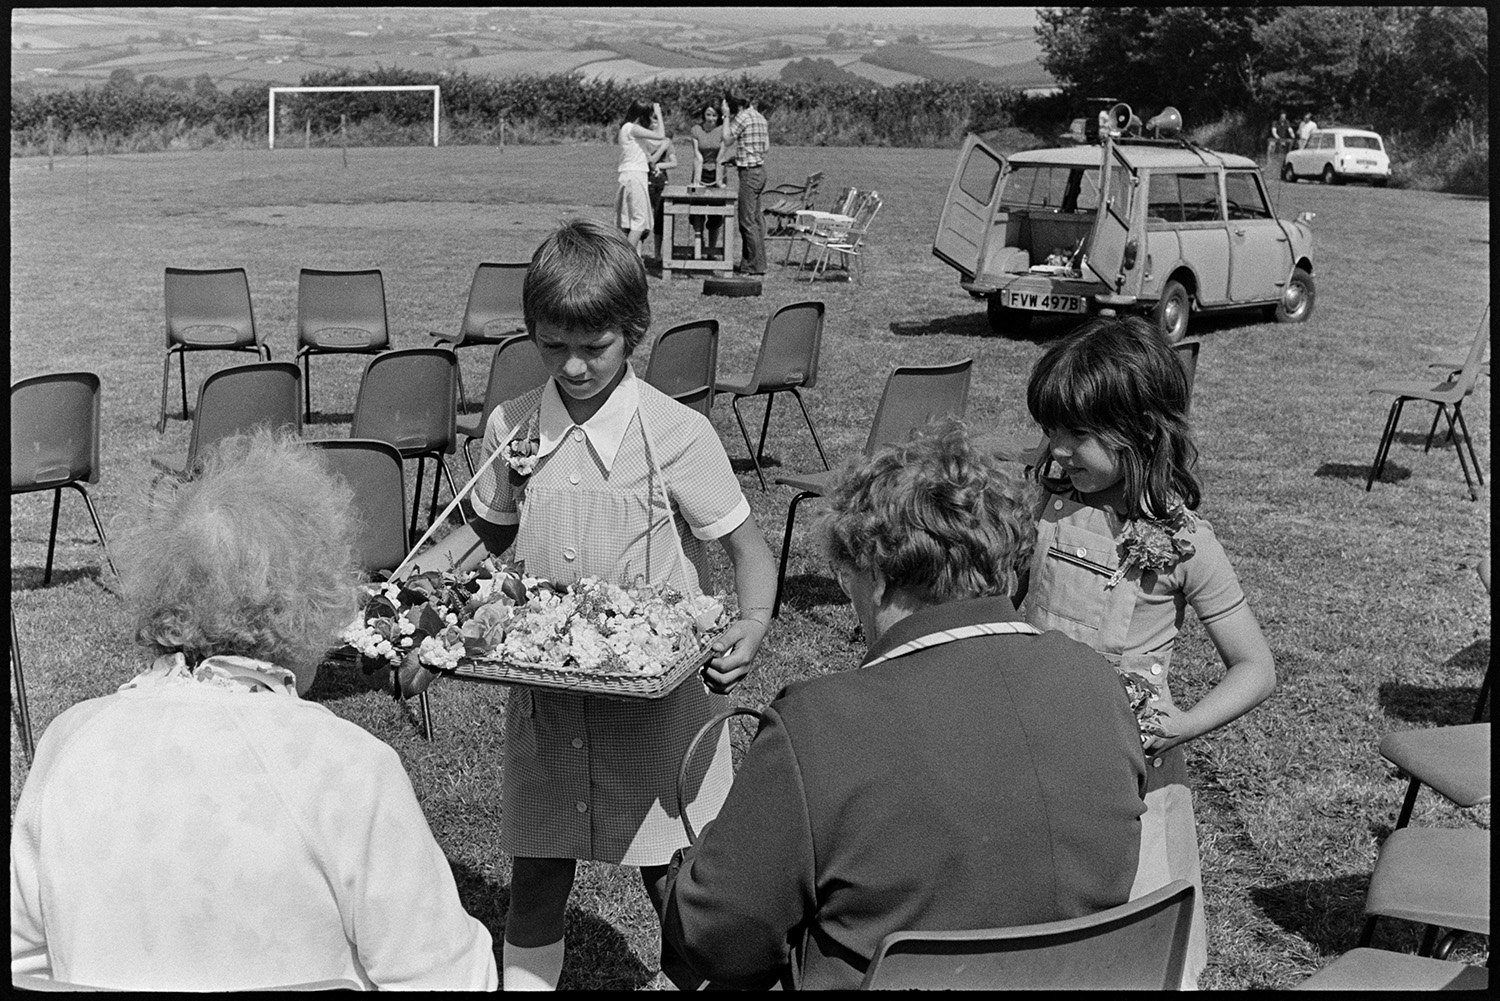 Children selling flowers at village fete. 
[Two girls selling flowers to two women at Atherington fete. A van with loudspeakers is parked in the field in the background.]